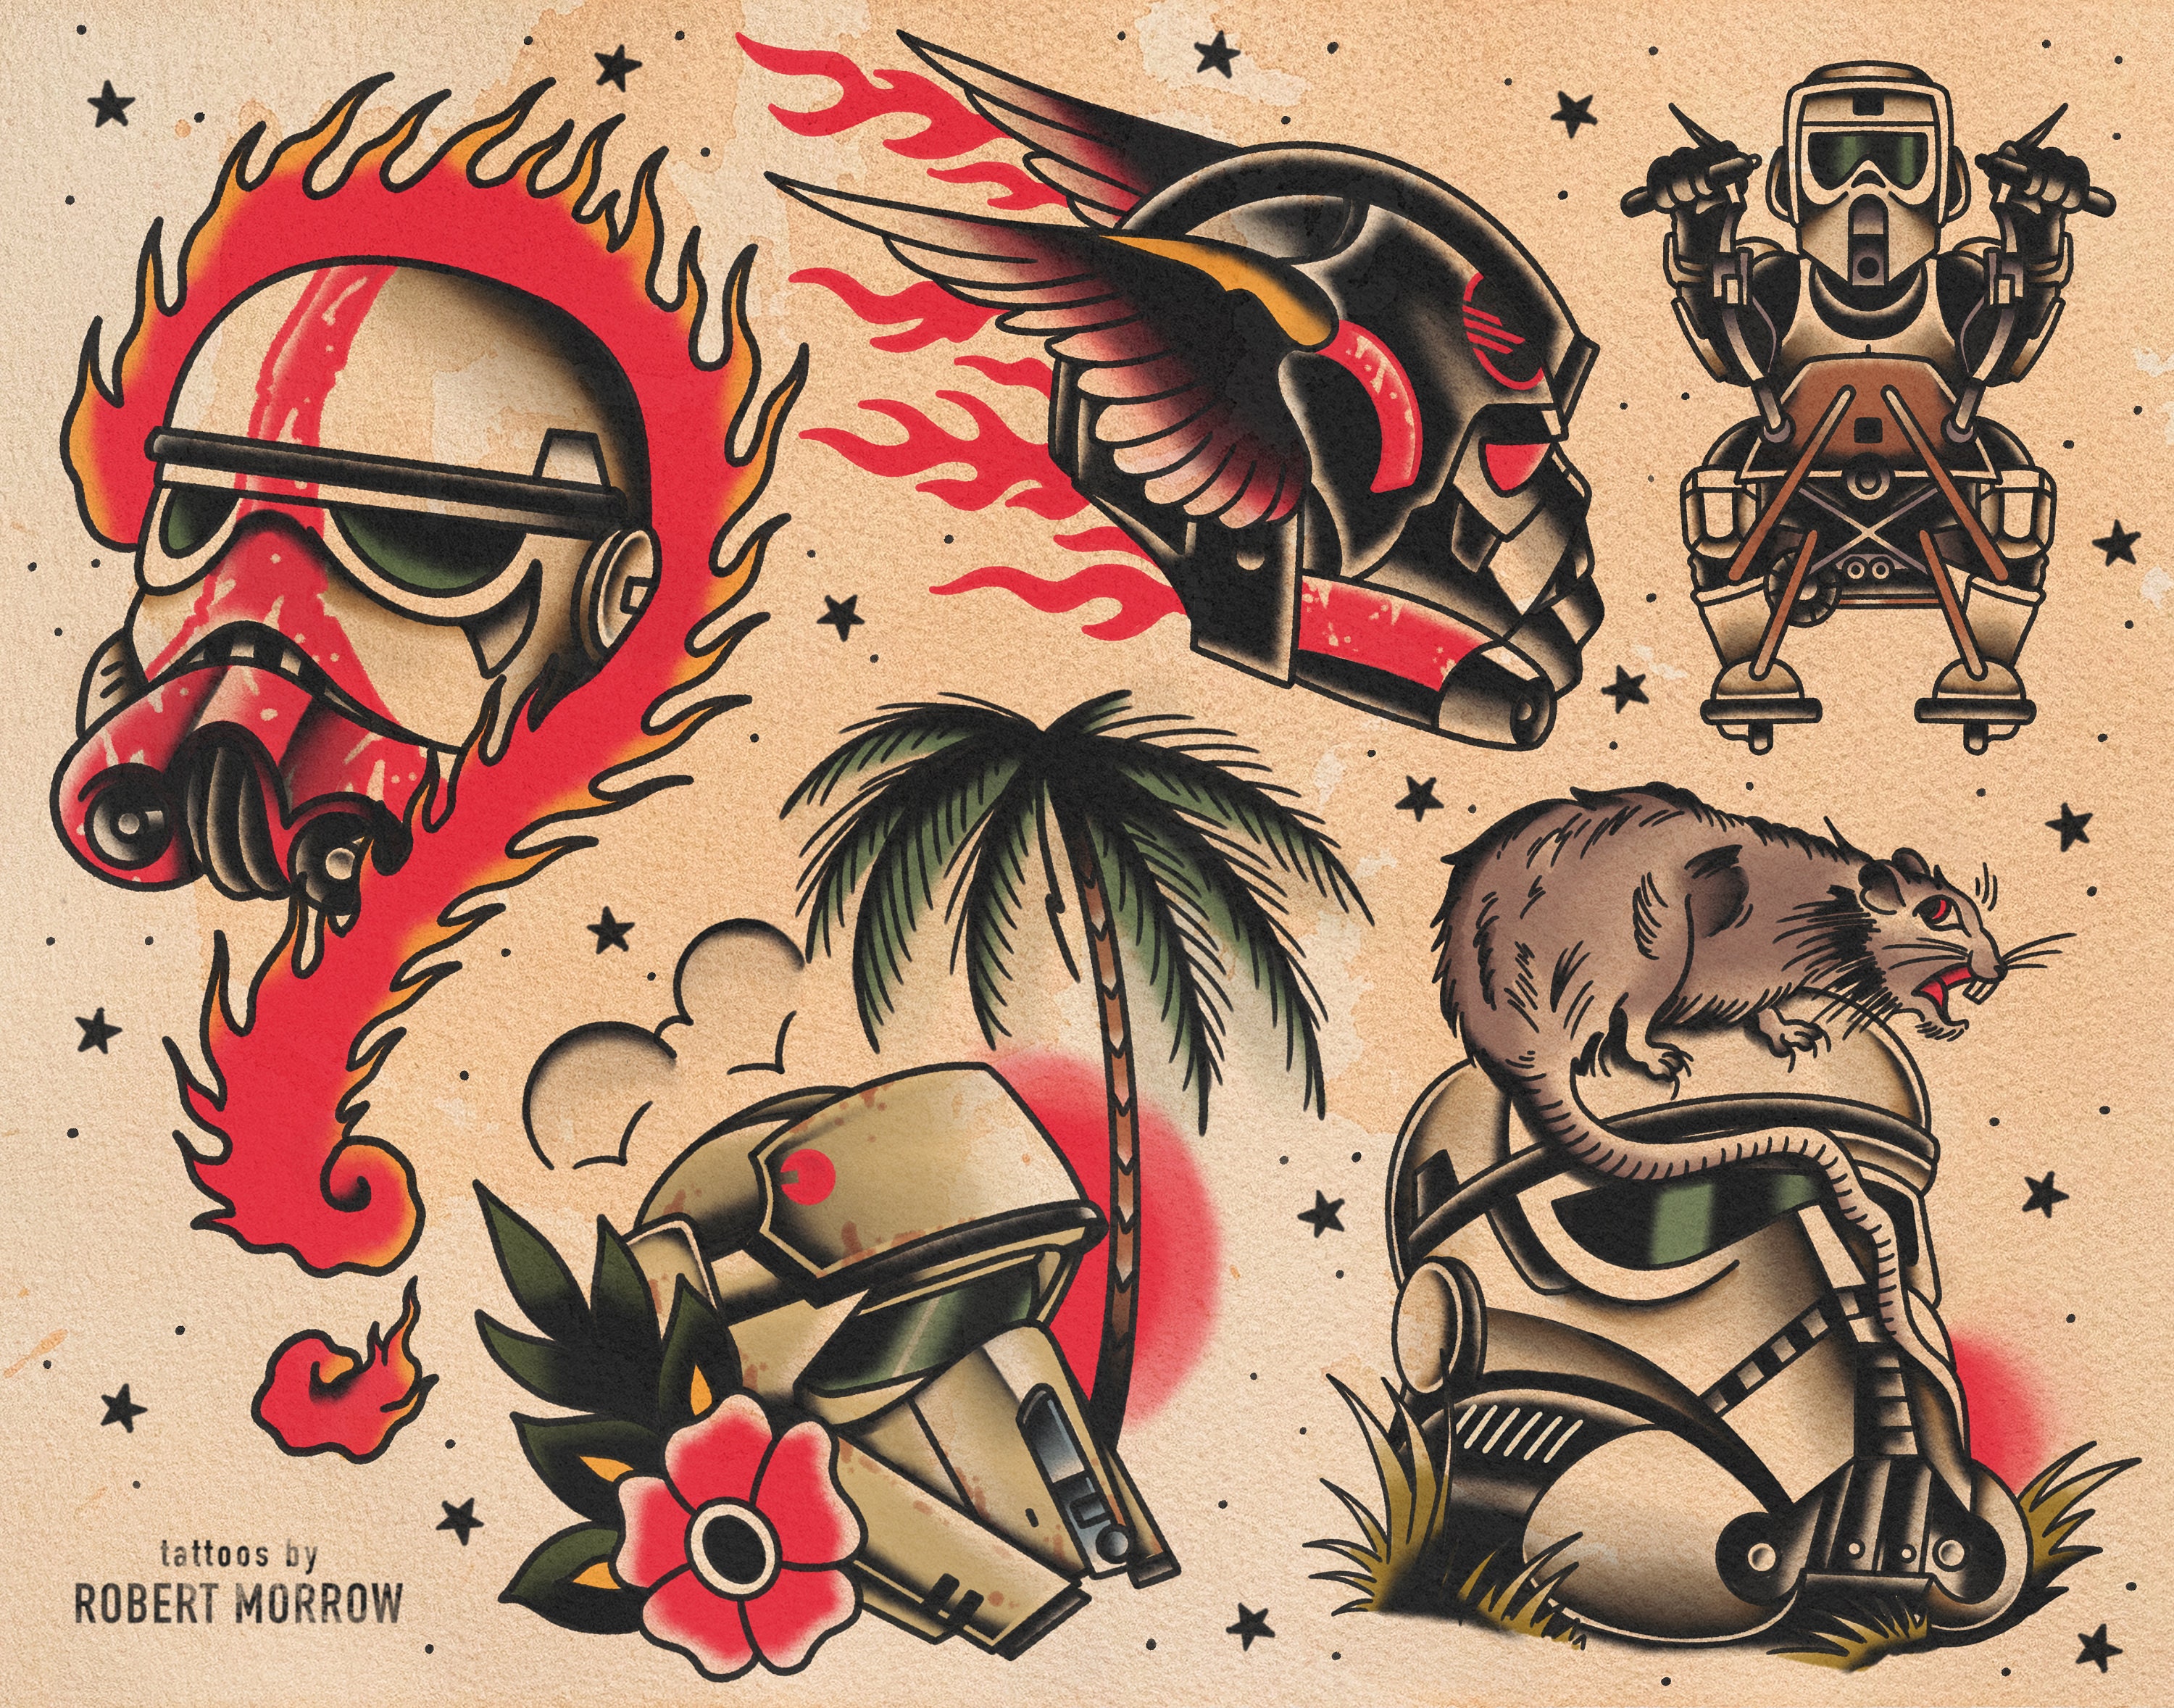 The Force is Strong With These 13 Star Wars Tattoo Designs  Inside Out